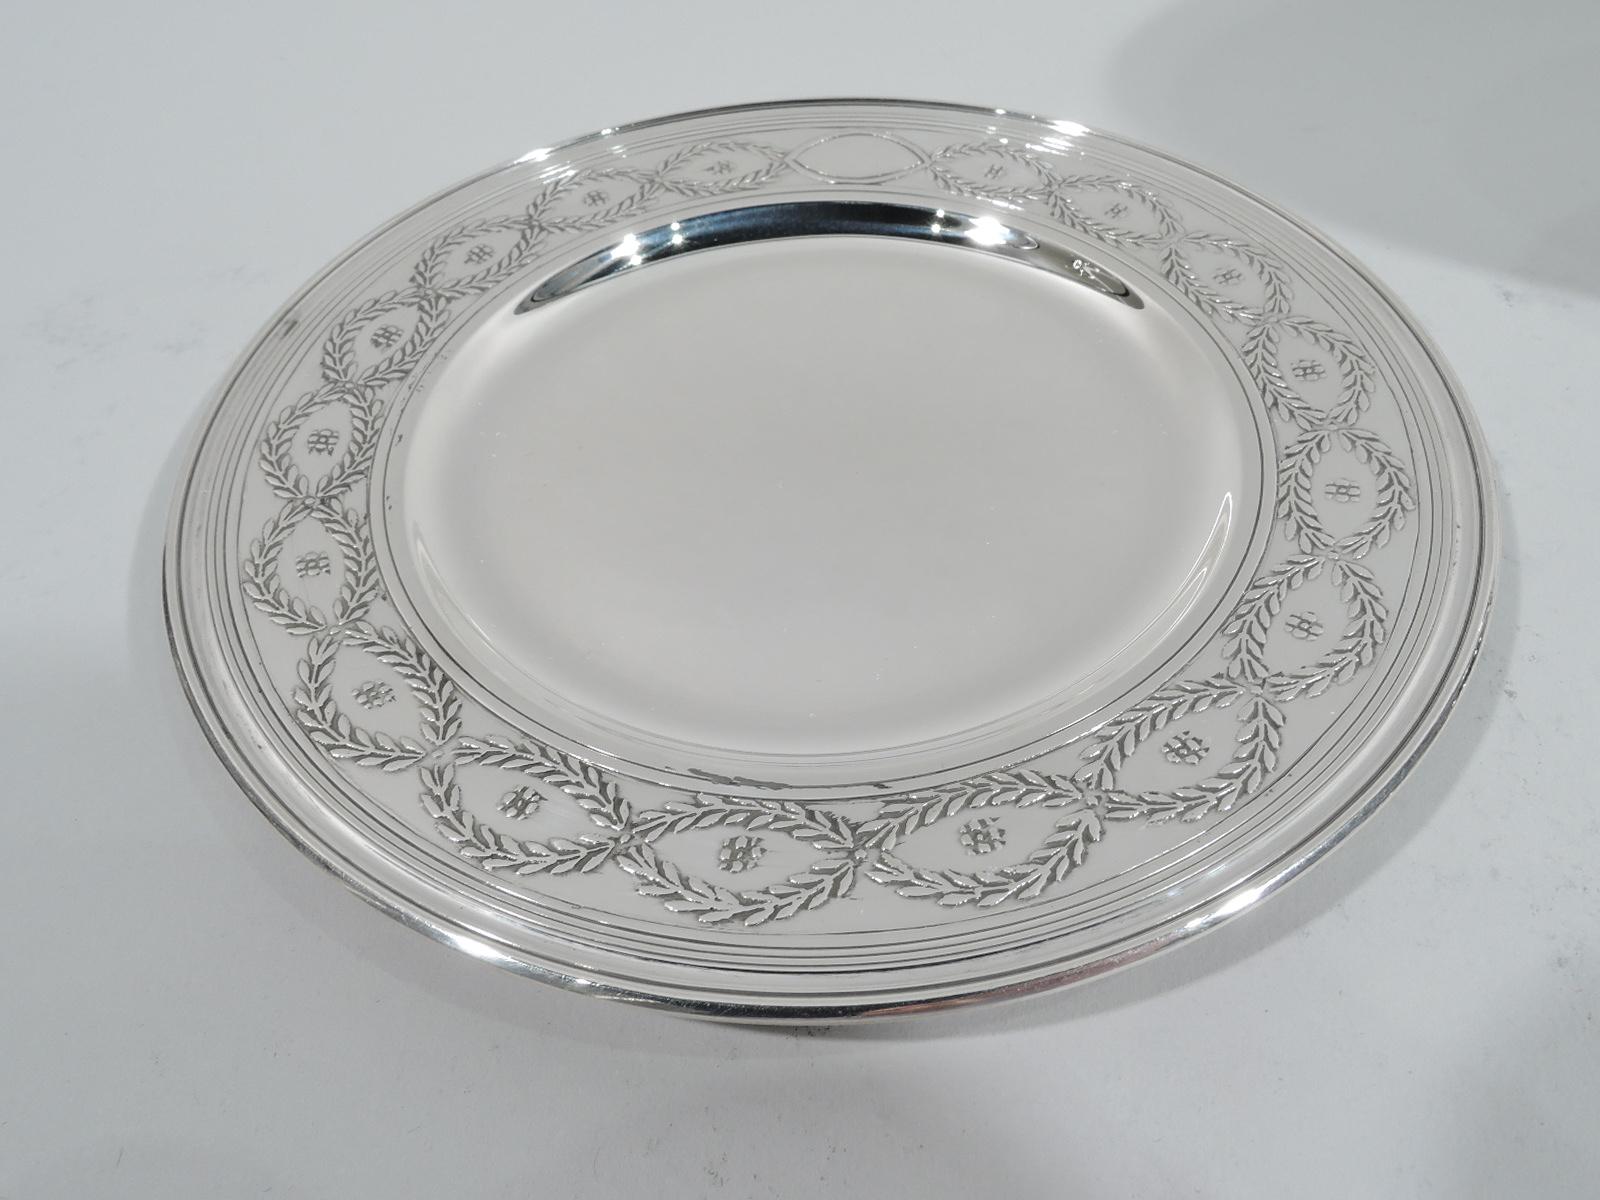 Set of 12 Winthrop sterling silver bread and butter plates. Made by Tiffany & Co. in New York, ca 1920. Each: Round well and wide shoulder with acid-etched laurel-wreath border inset with flower heads. Fine pieces in the historic pattern that was